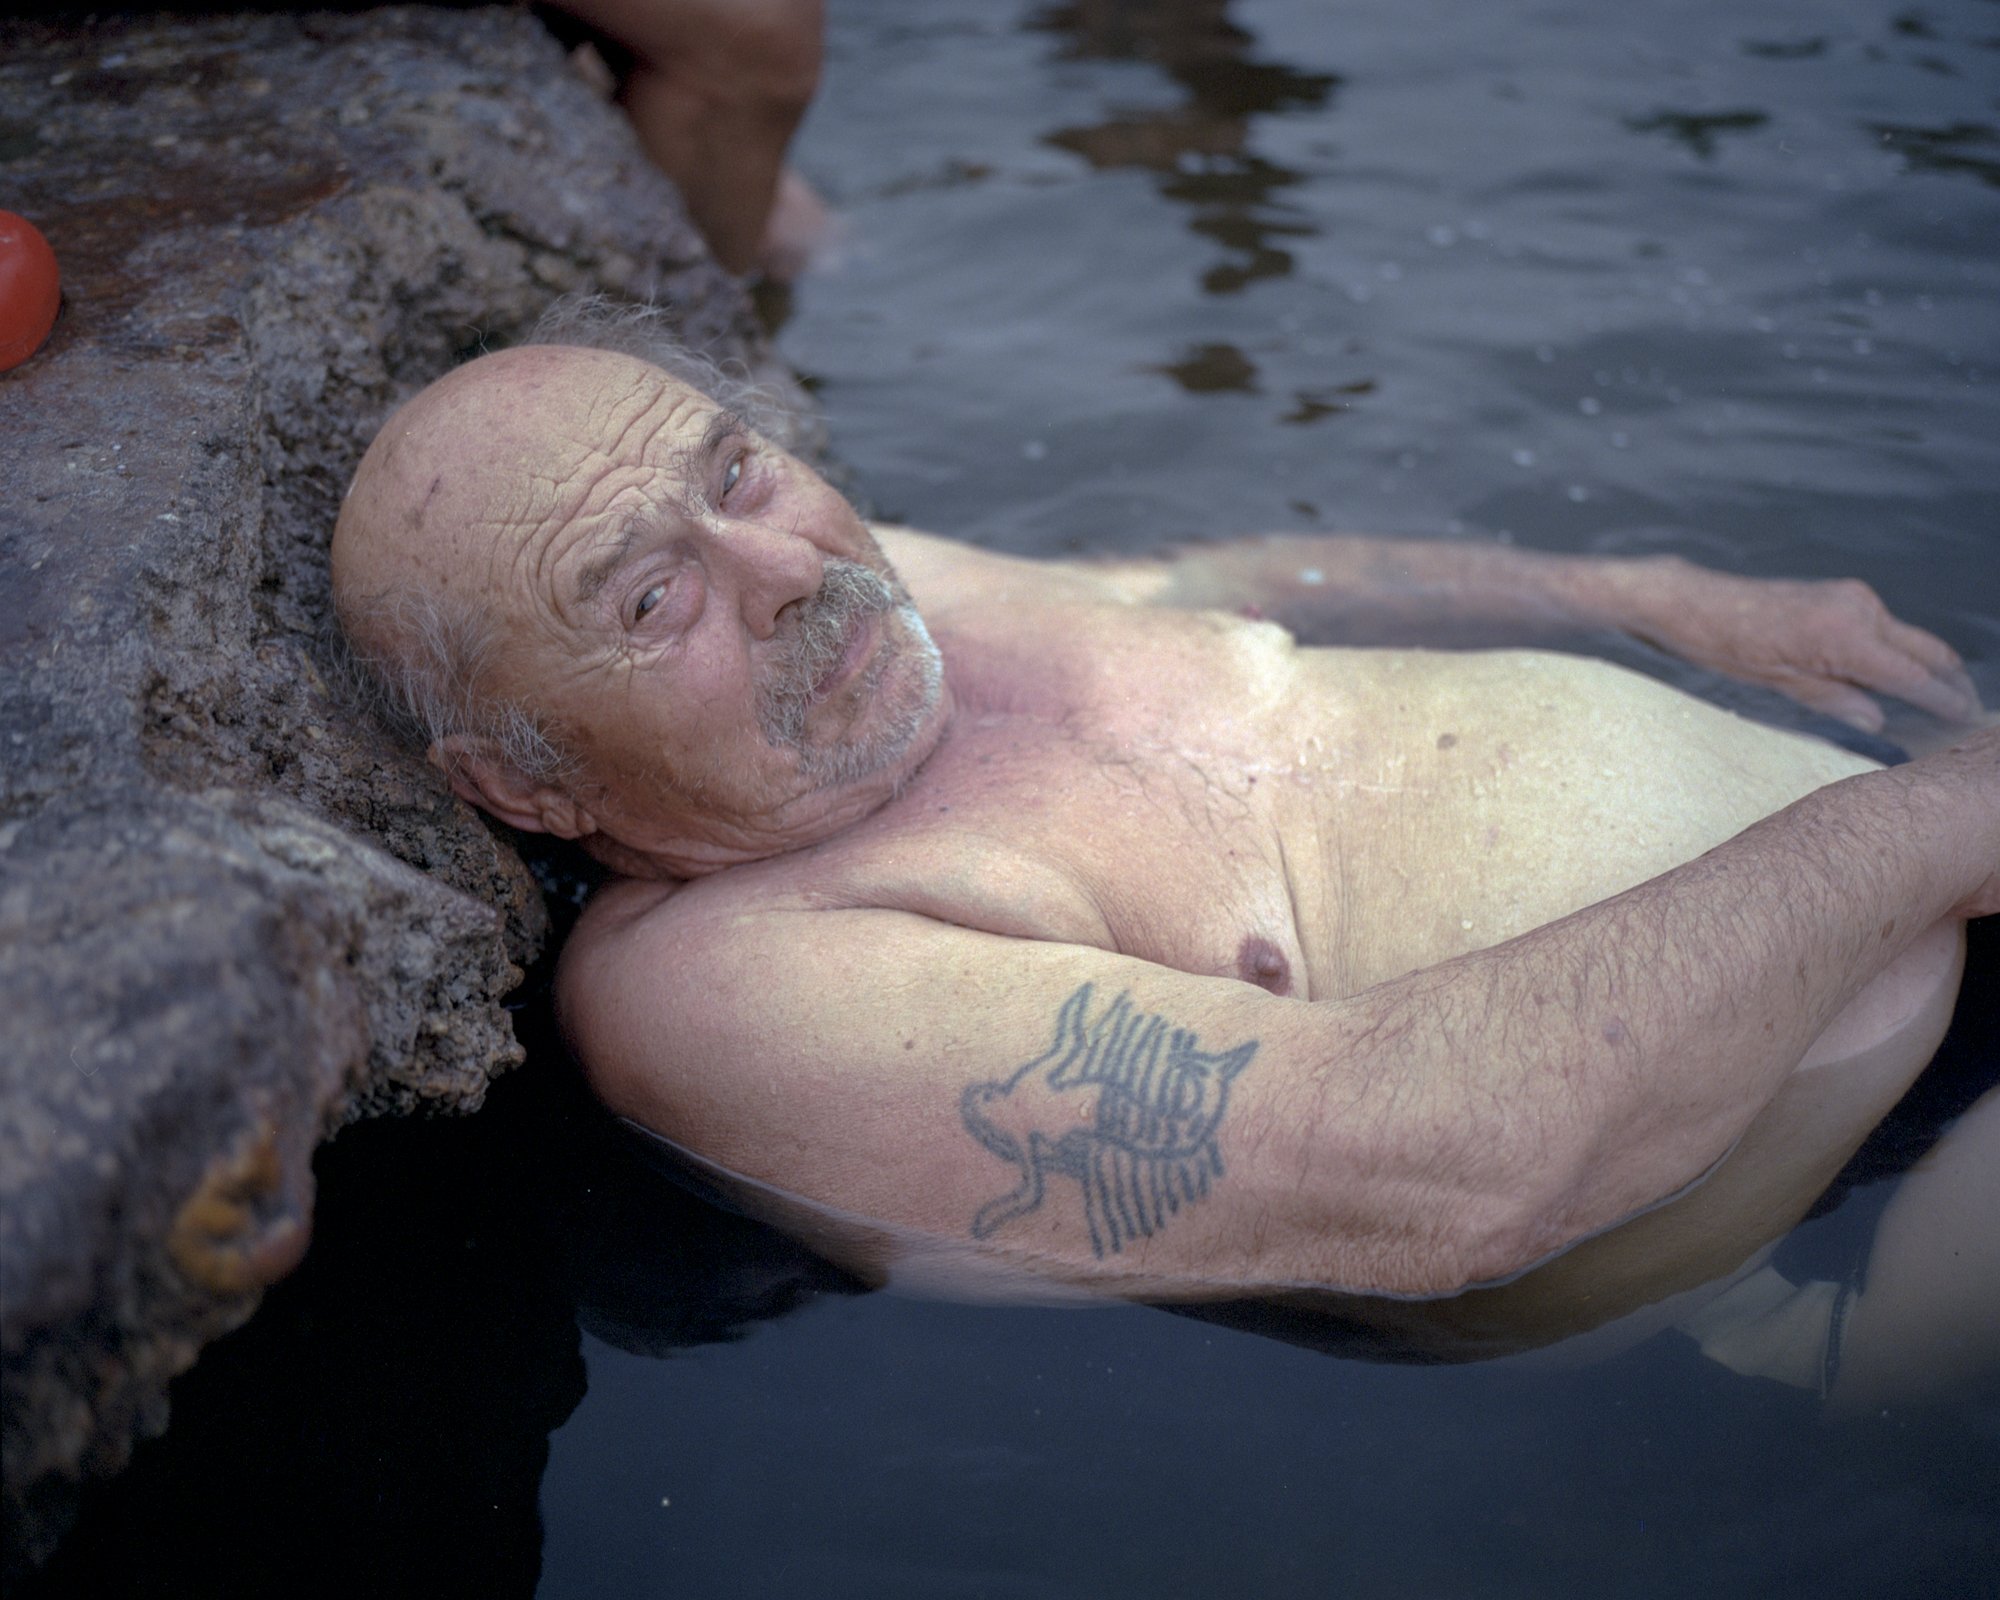  Bather with a mermaid tattoo. Törtel, Hungary, 2022   “I am near Törtel in the middle of nowhere. I sit in a healing thermal water spring, on the site of an abandoned oil well where water has burst up instead of black gold in the 60s, much to the de